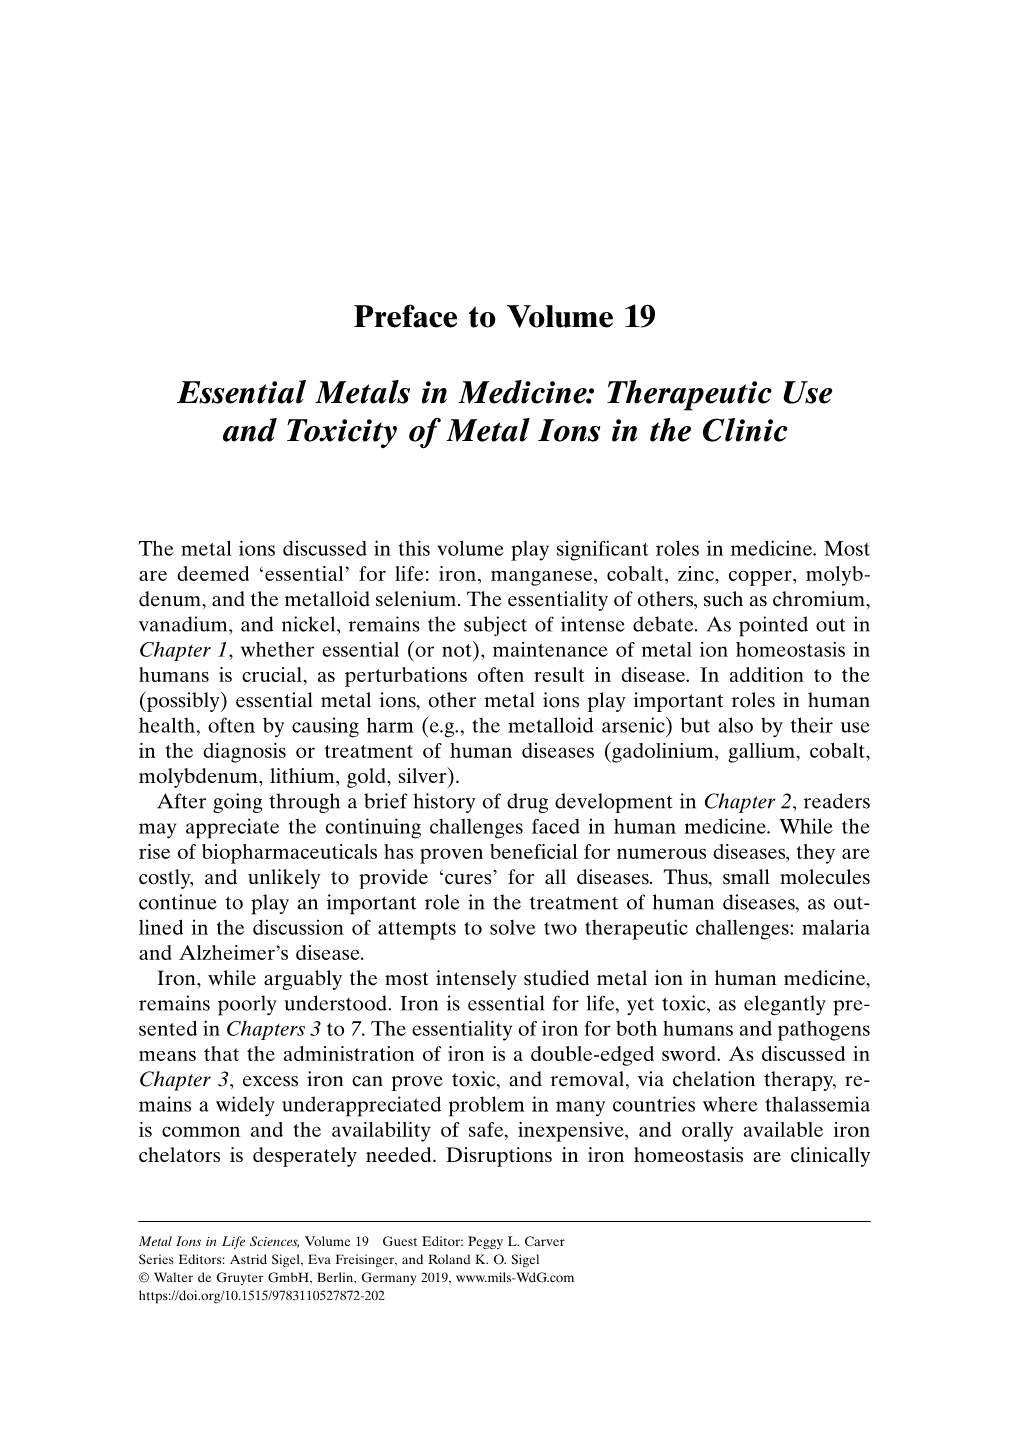 Therapeutic Use and Toxicity of Metal Ions in the Clinic